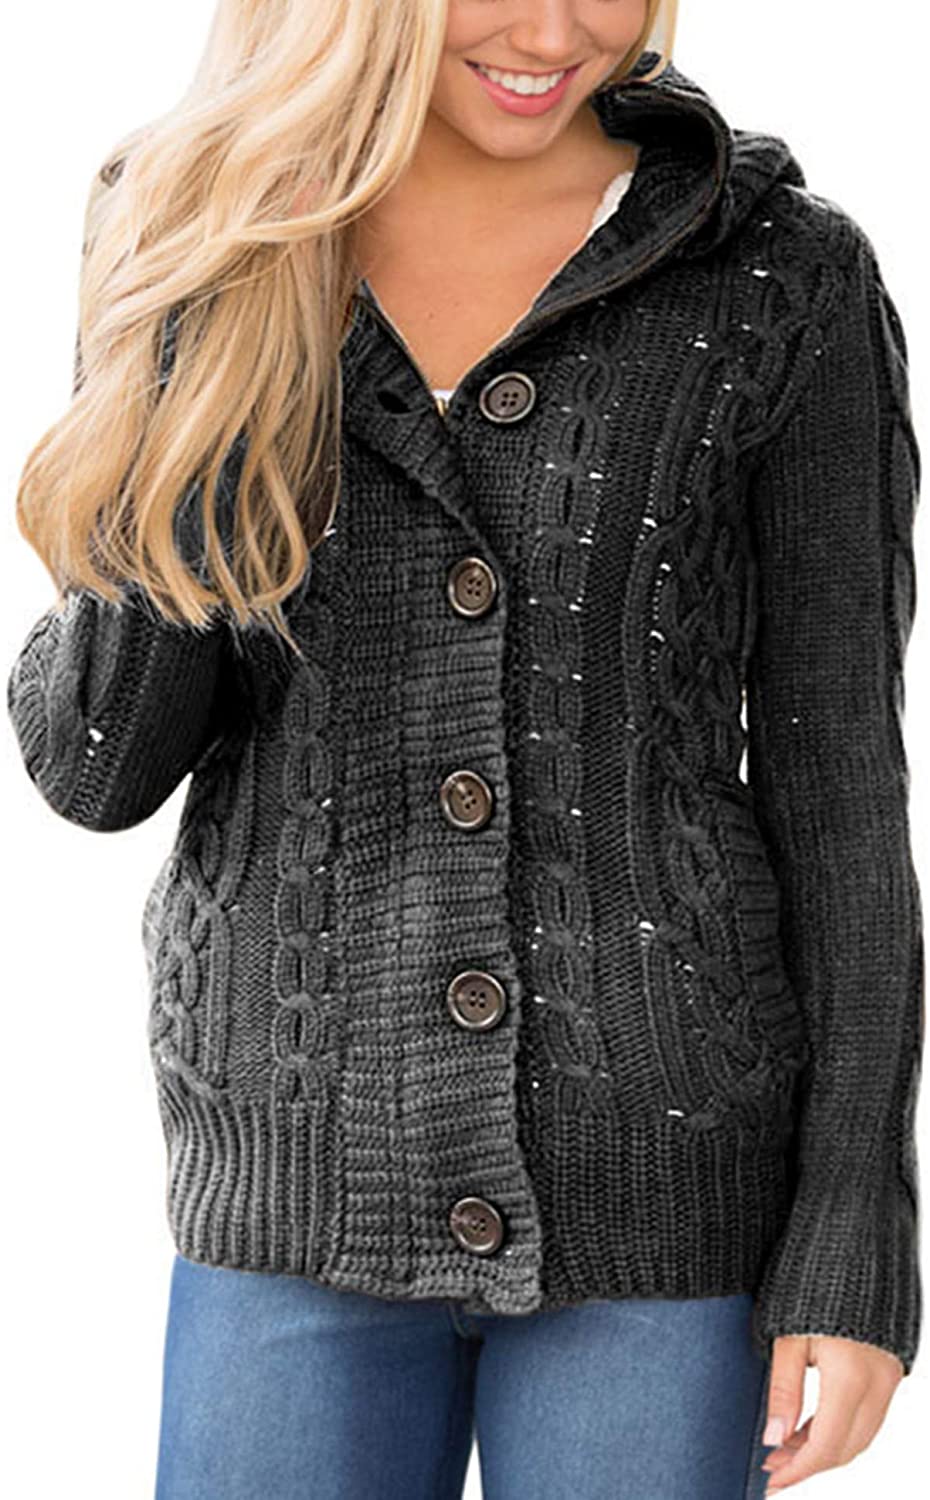 Sidefeel Women Hooded Knit Cardigans Button Cable Sweater Coat | eBay